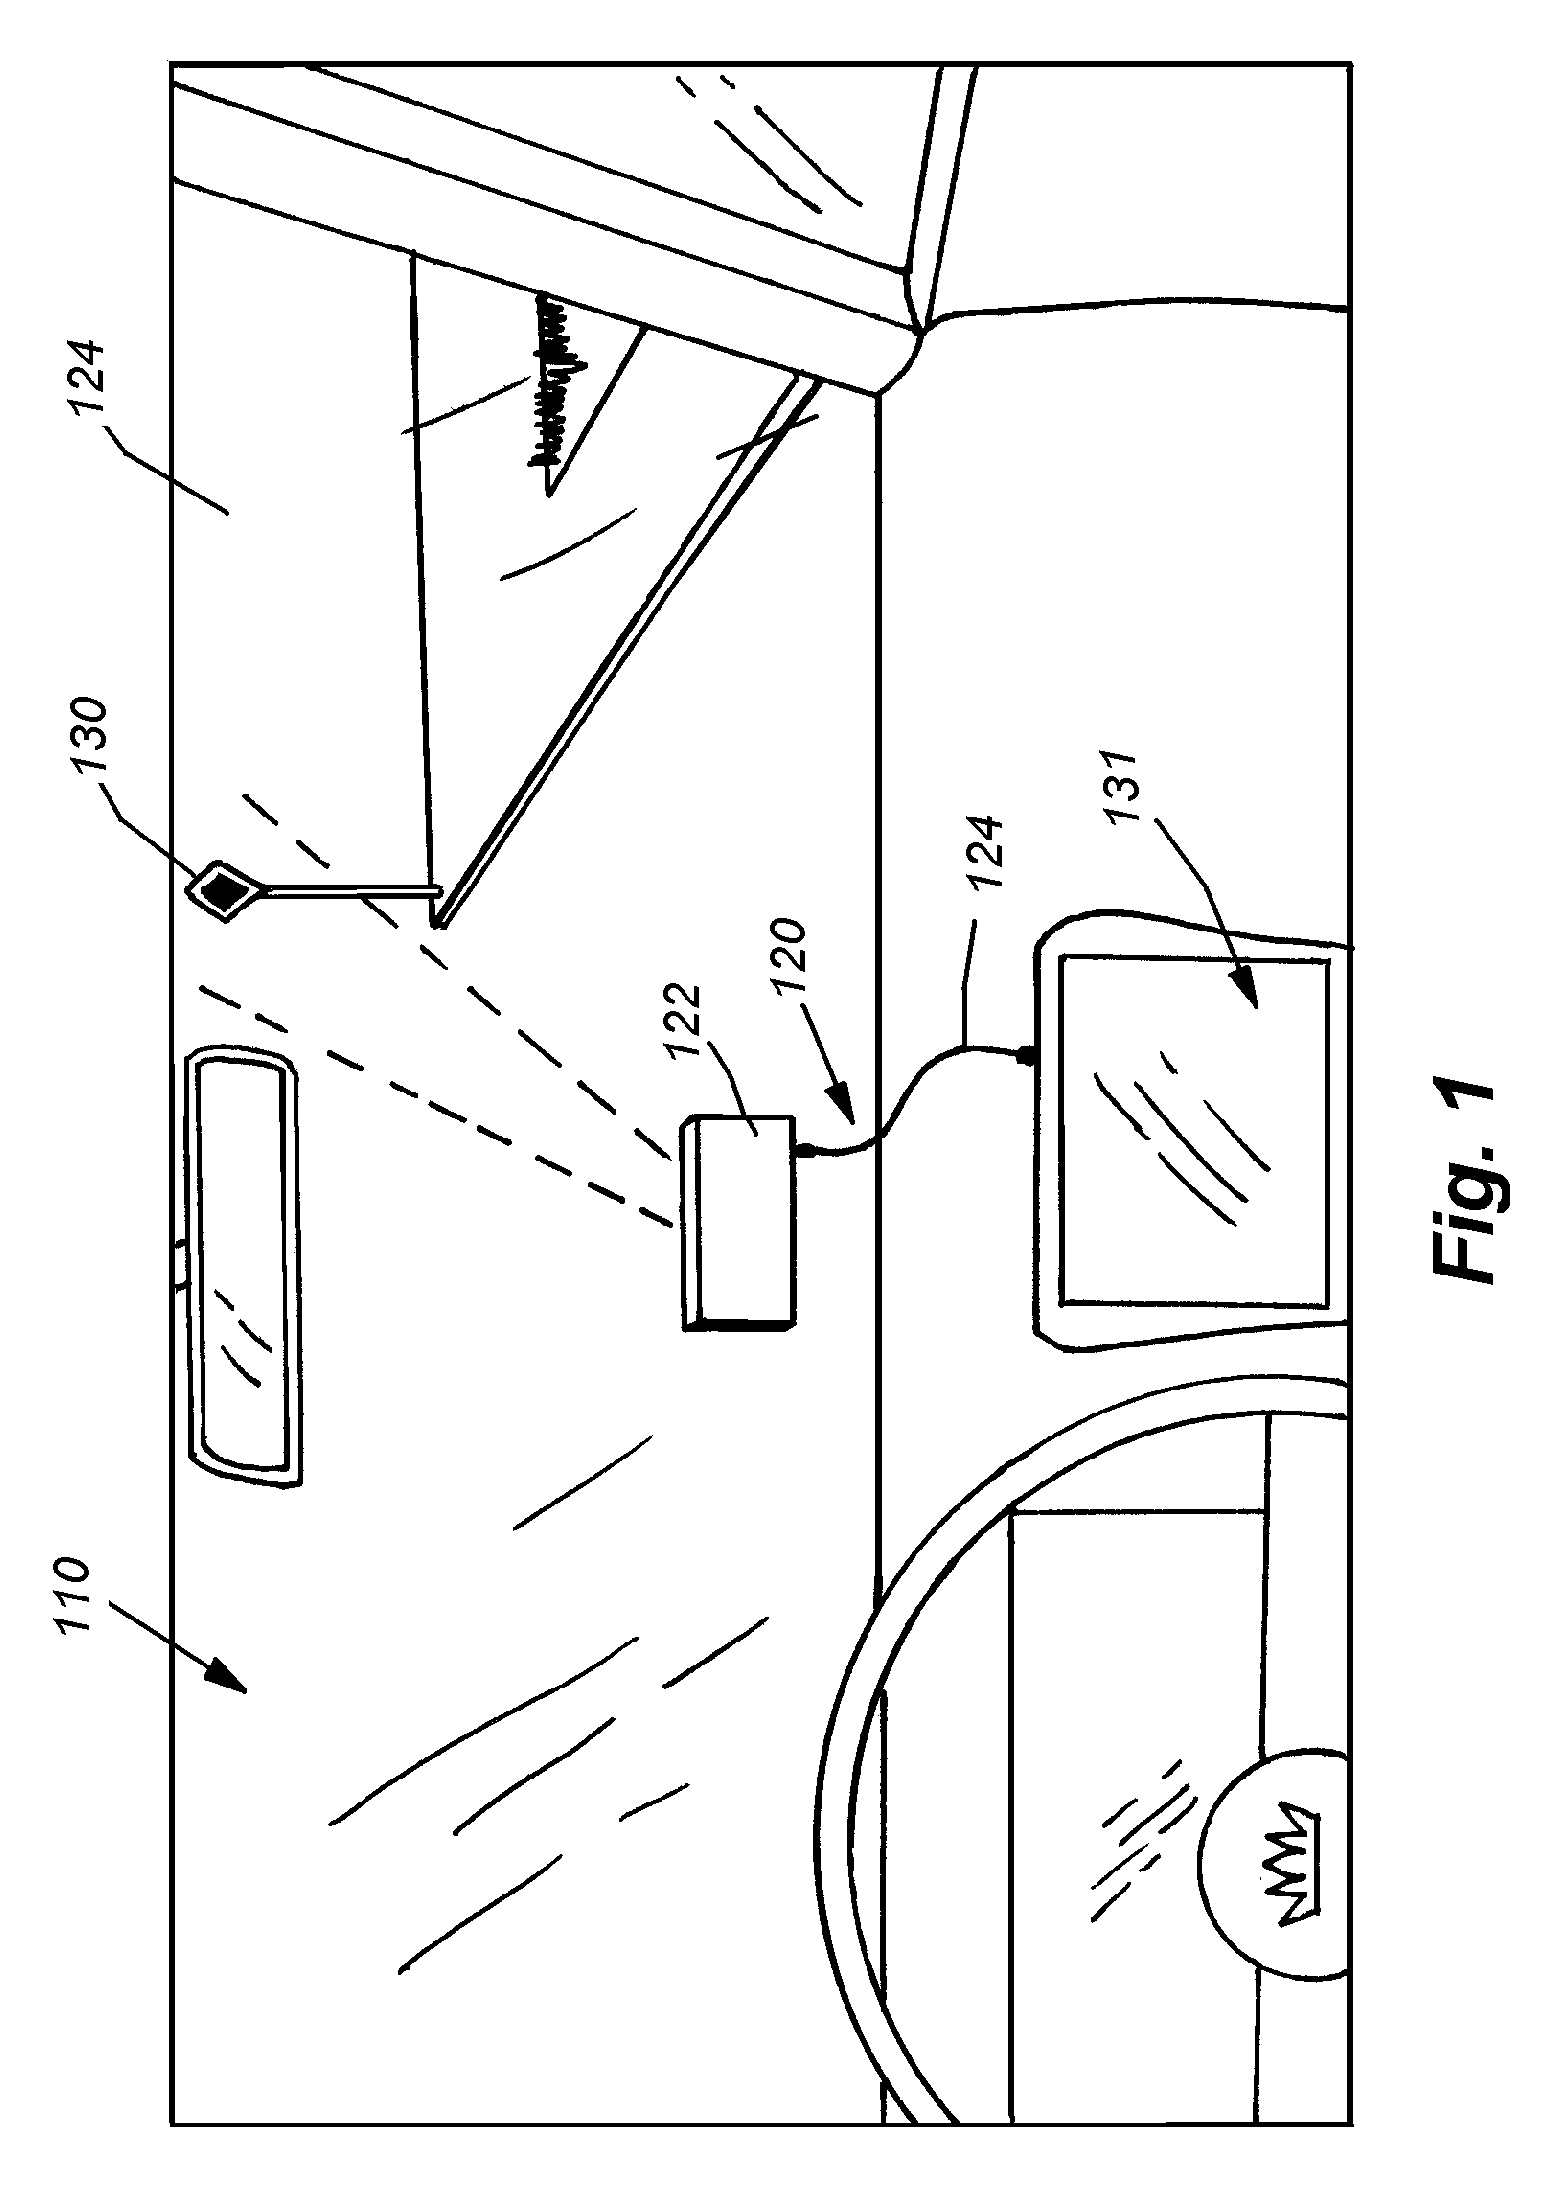 System and method for traffic sign recognition